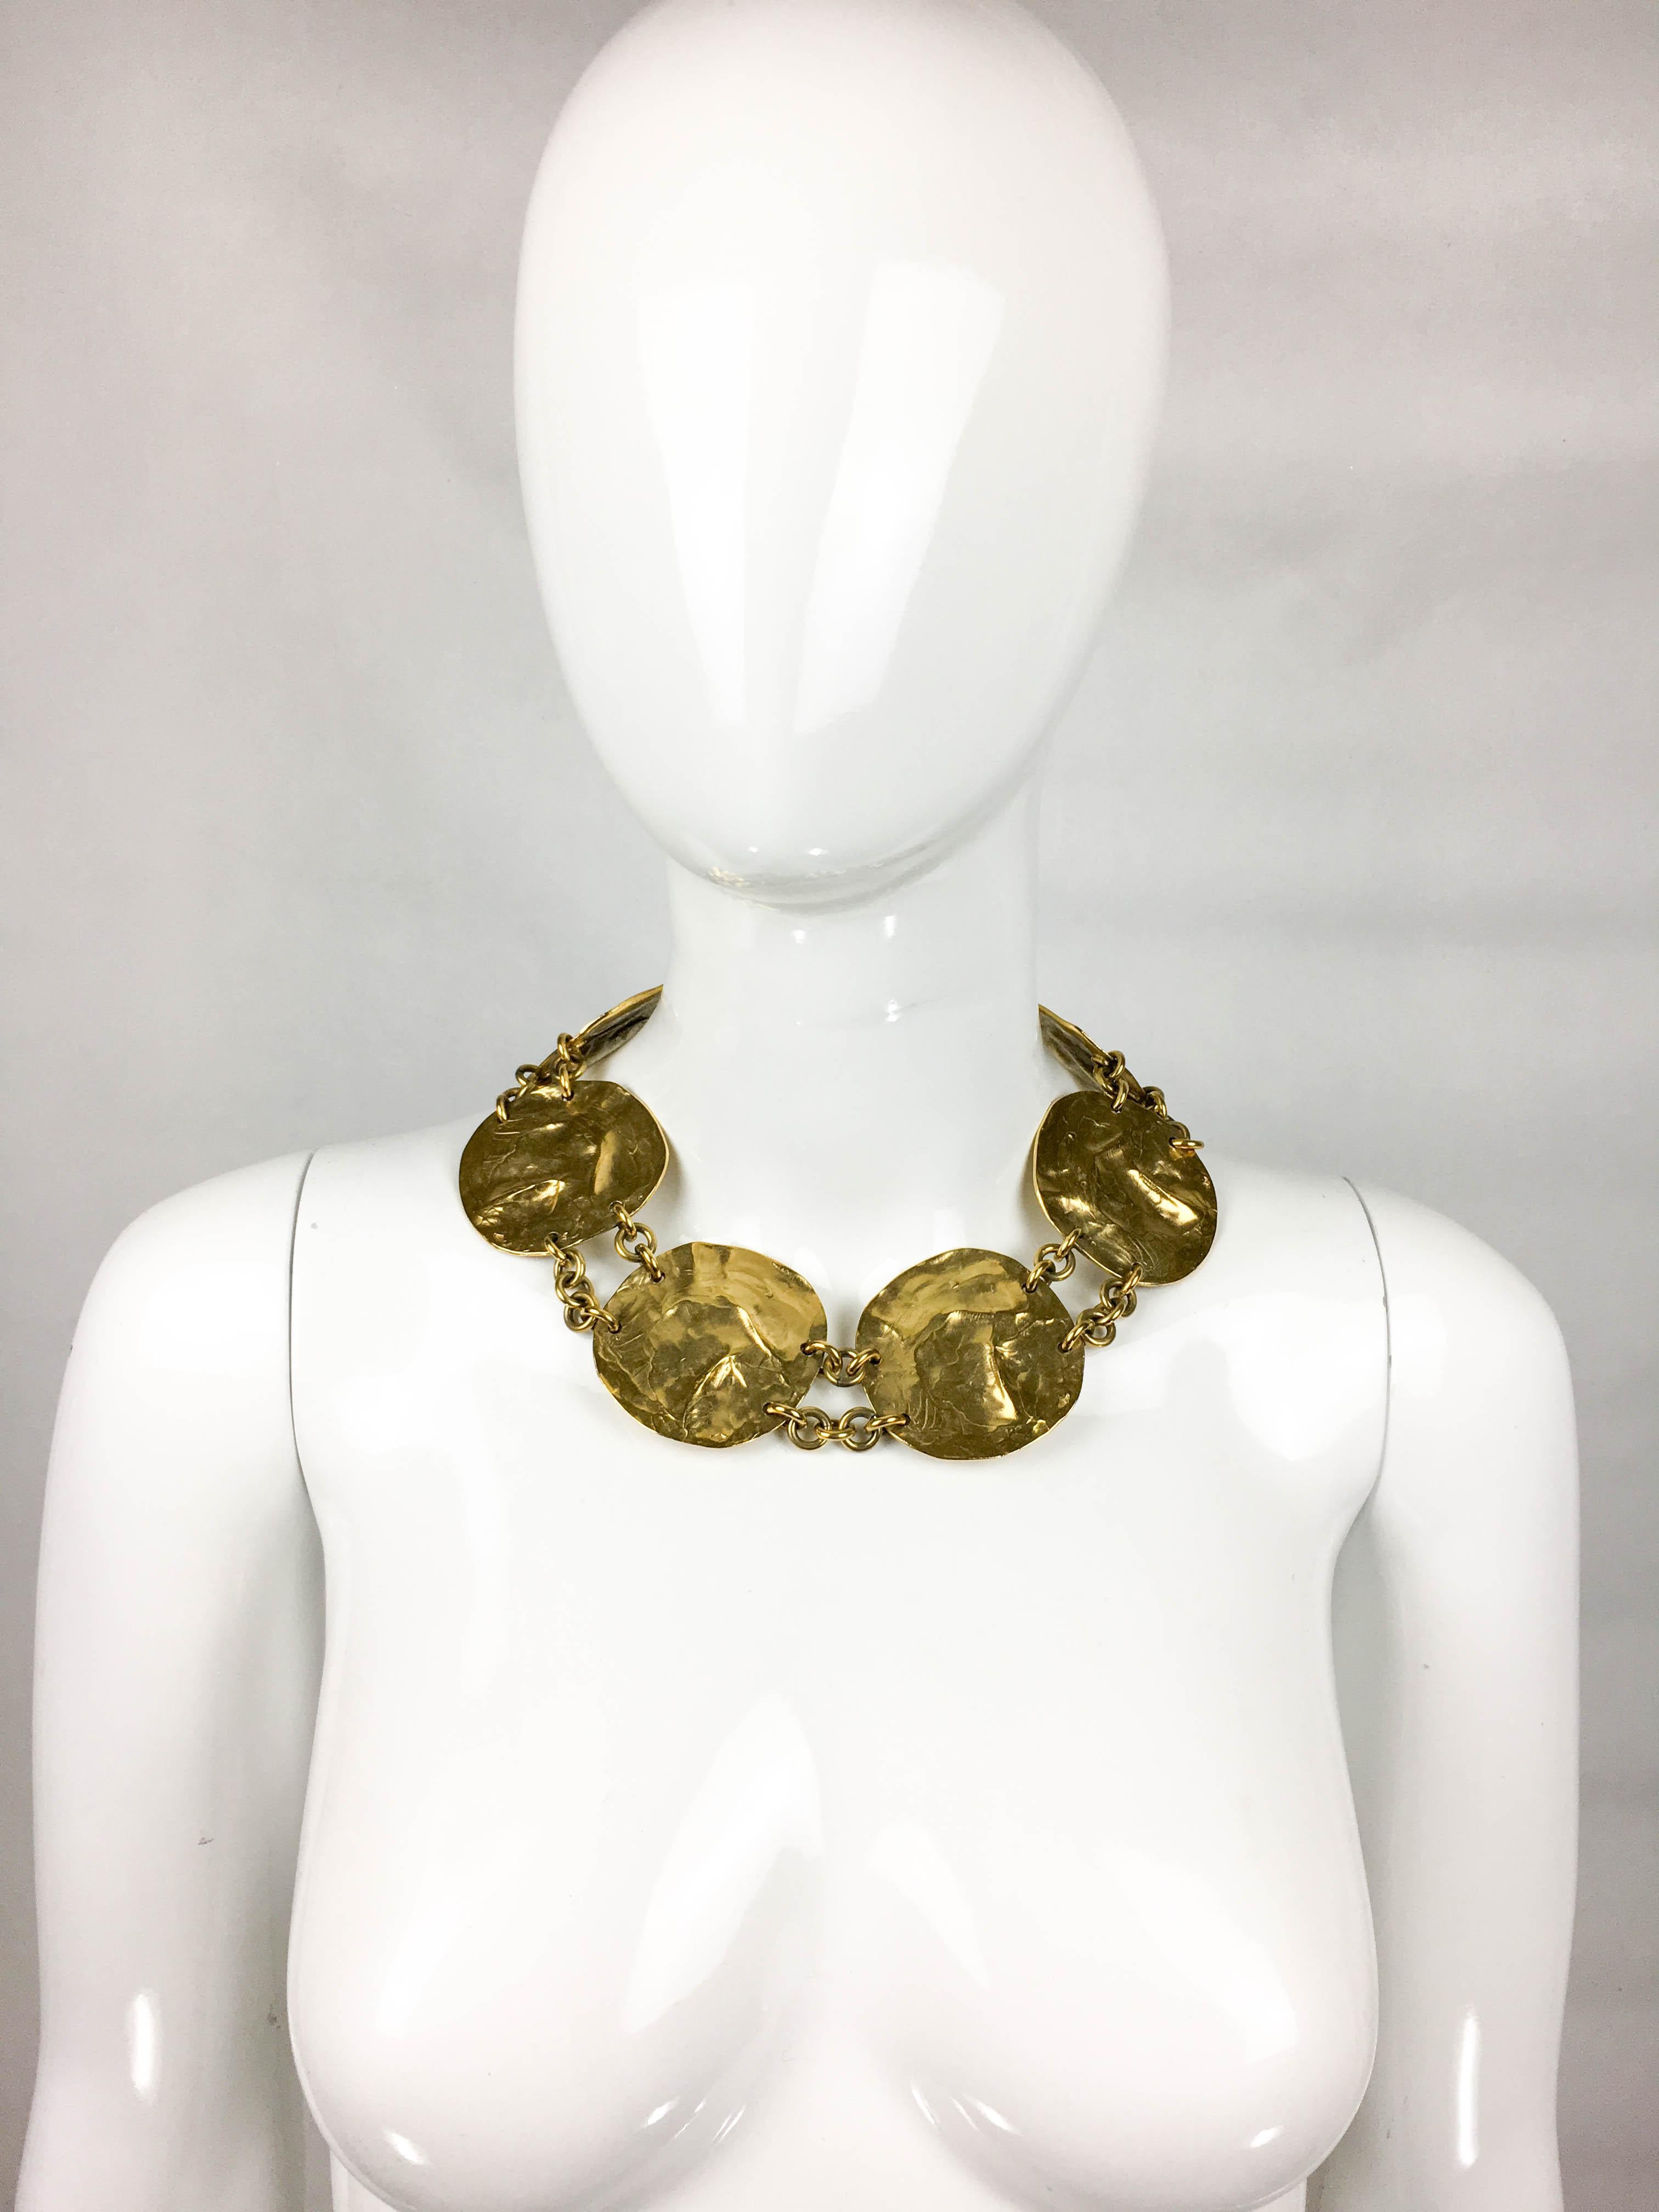 Vintage Yves Saint Laurent Gold-Plated Disk Necklace. This stunning piece by Yves Saint Laurent was created by Robert Goossens for the 1989 Spring / Summer Collection. Made in gold-plated metal, six disks with organic feel and look linked by chains.